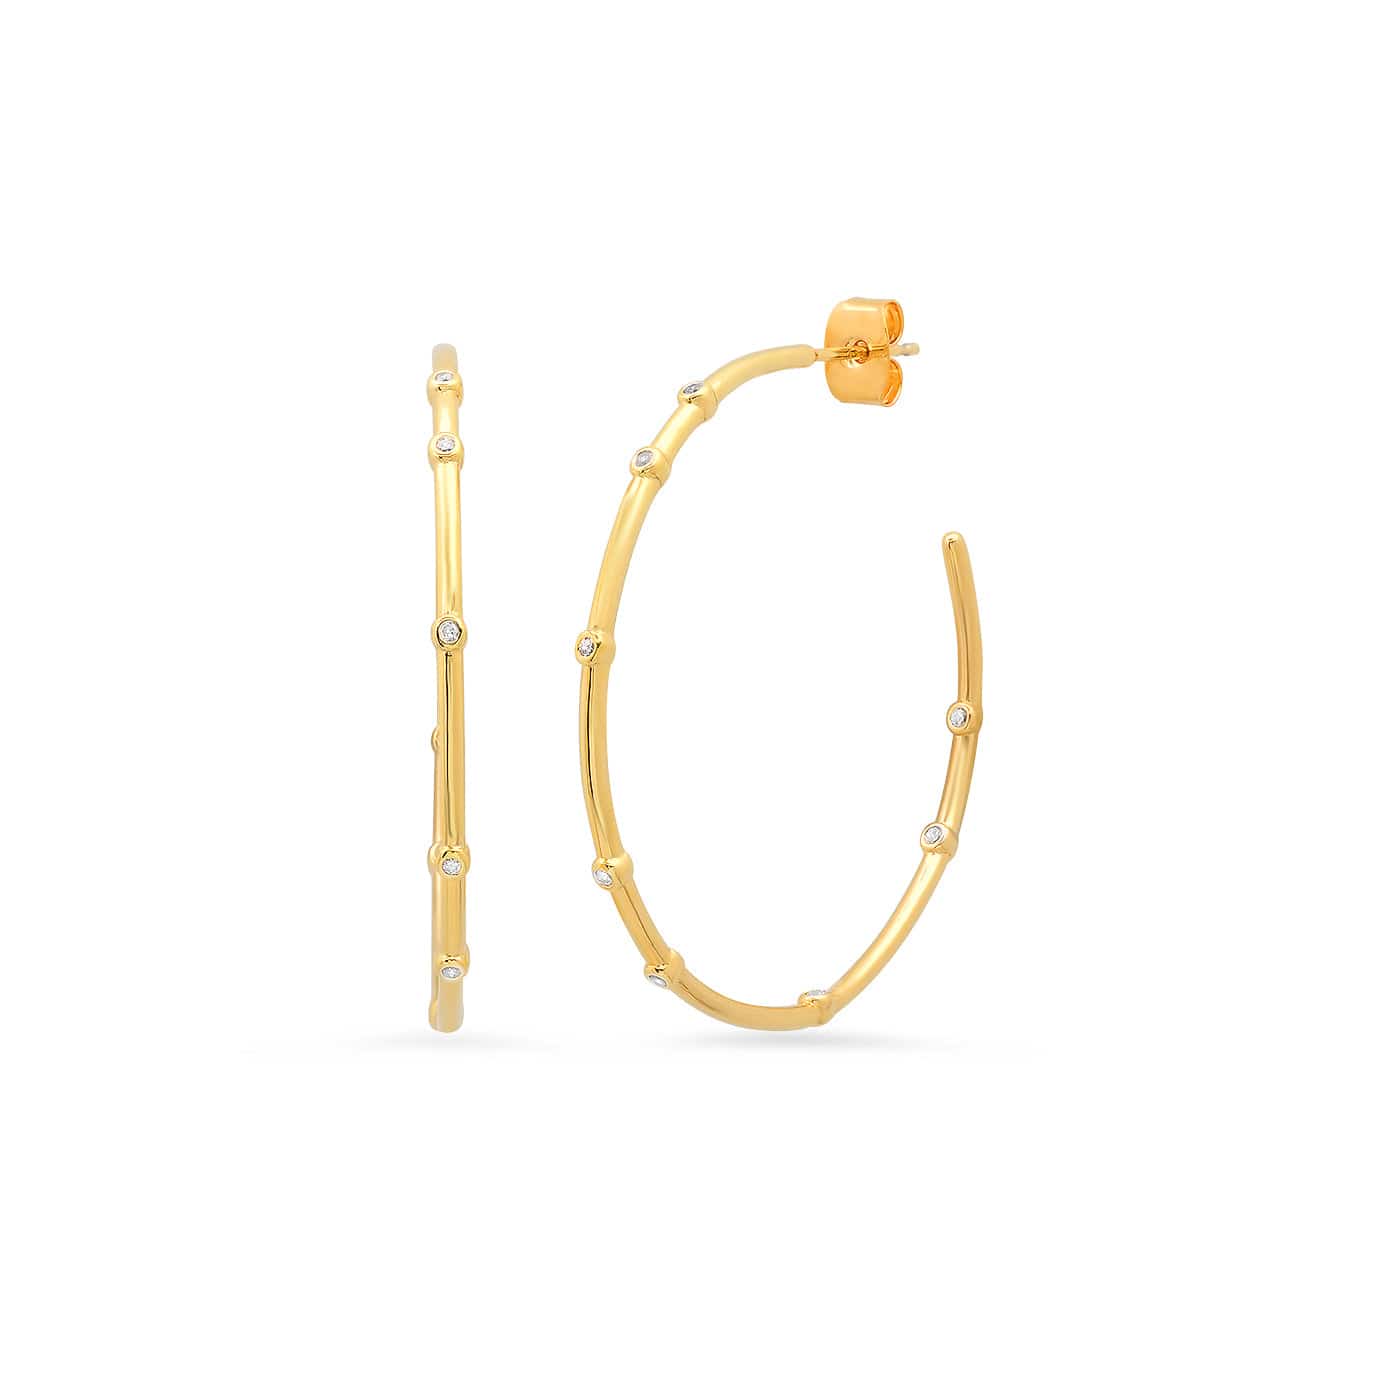 TAI JEWELRY Earrings Open Hoops With CZ Accents